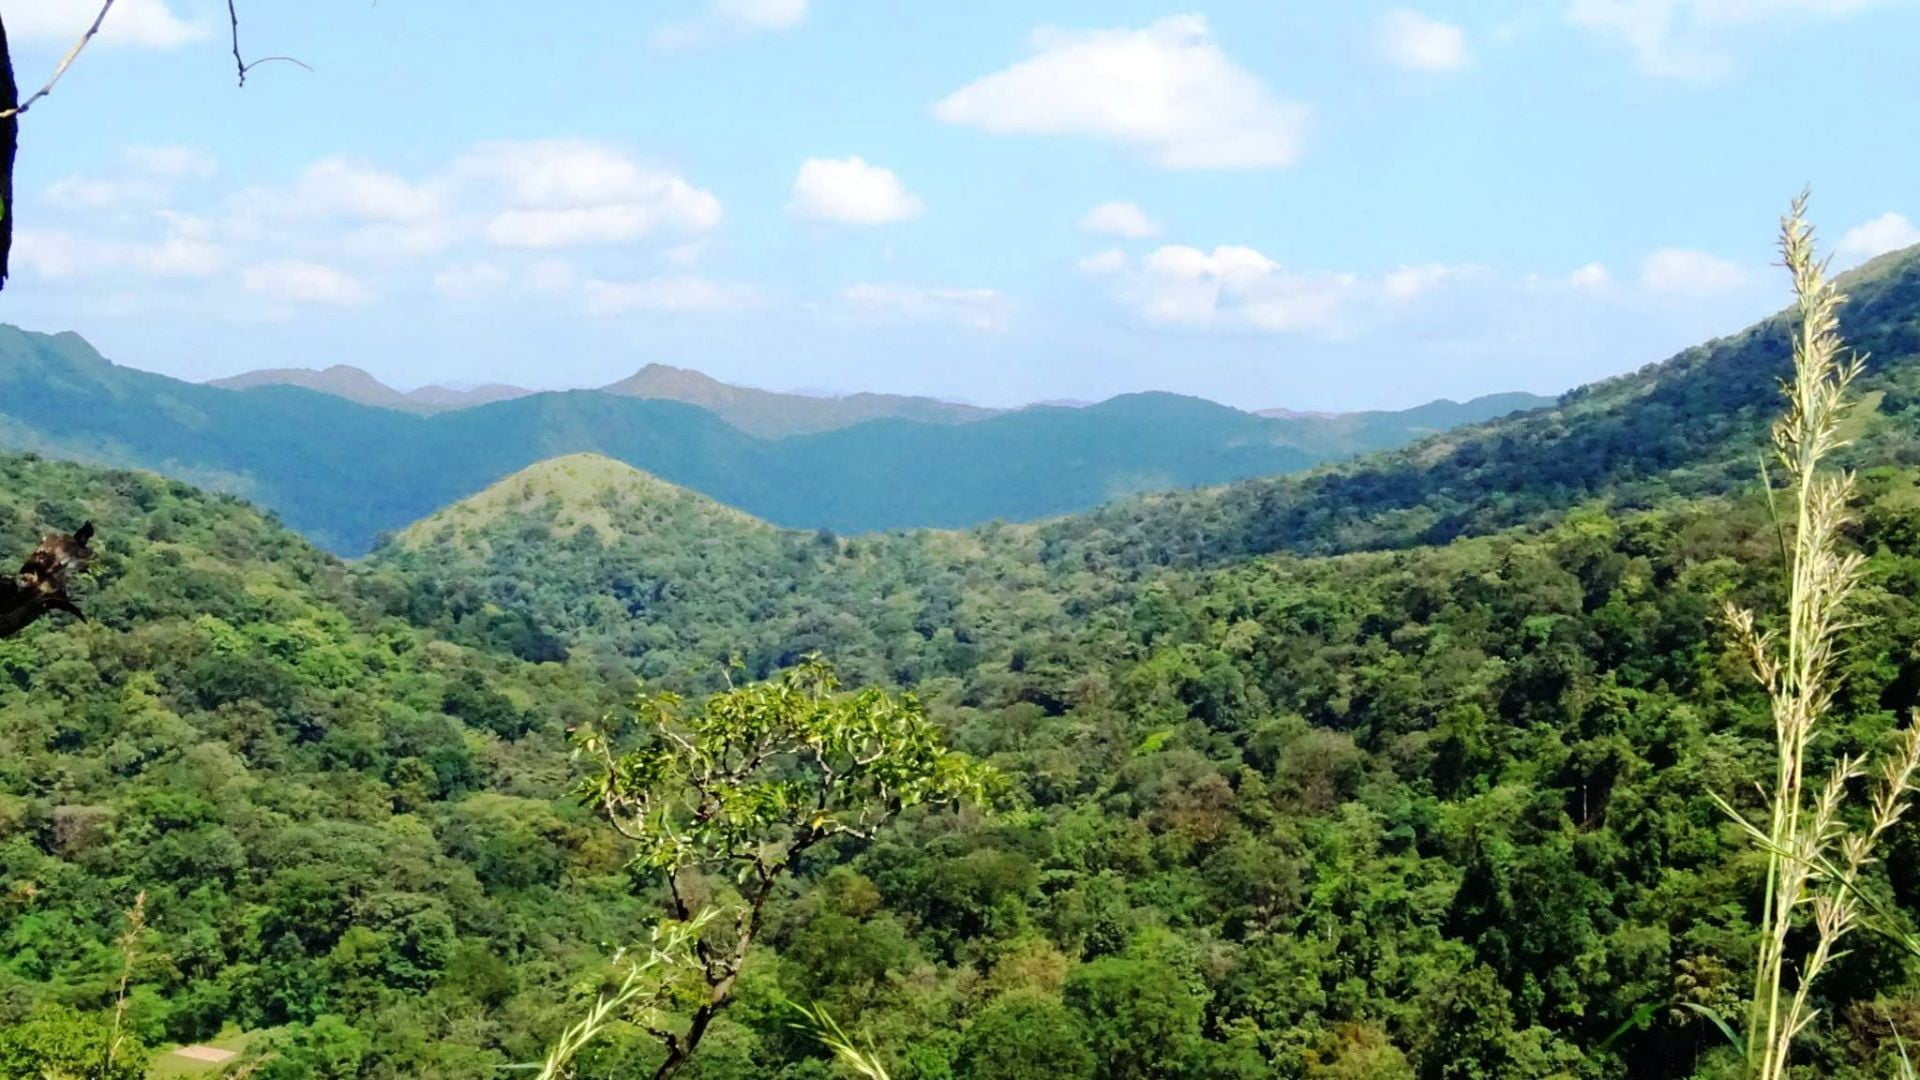 Eco-Friendly Tourism in India: Coorg, Karnataka. Green rolling forested hills